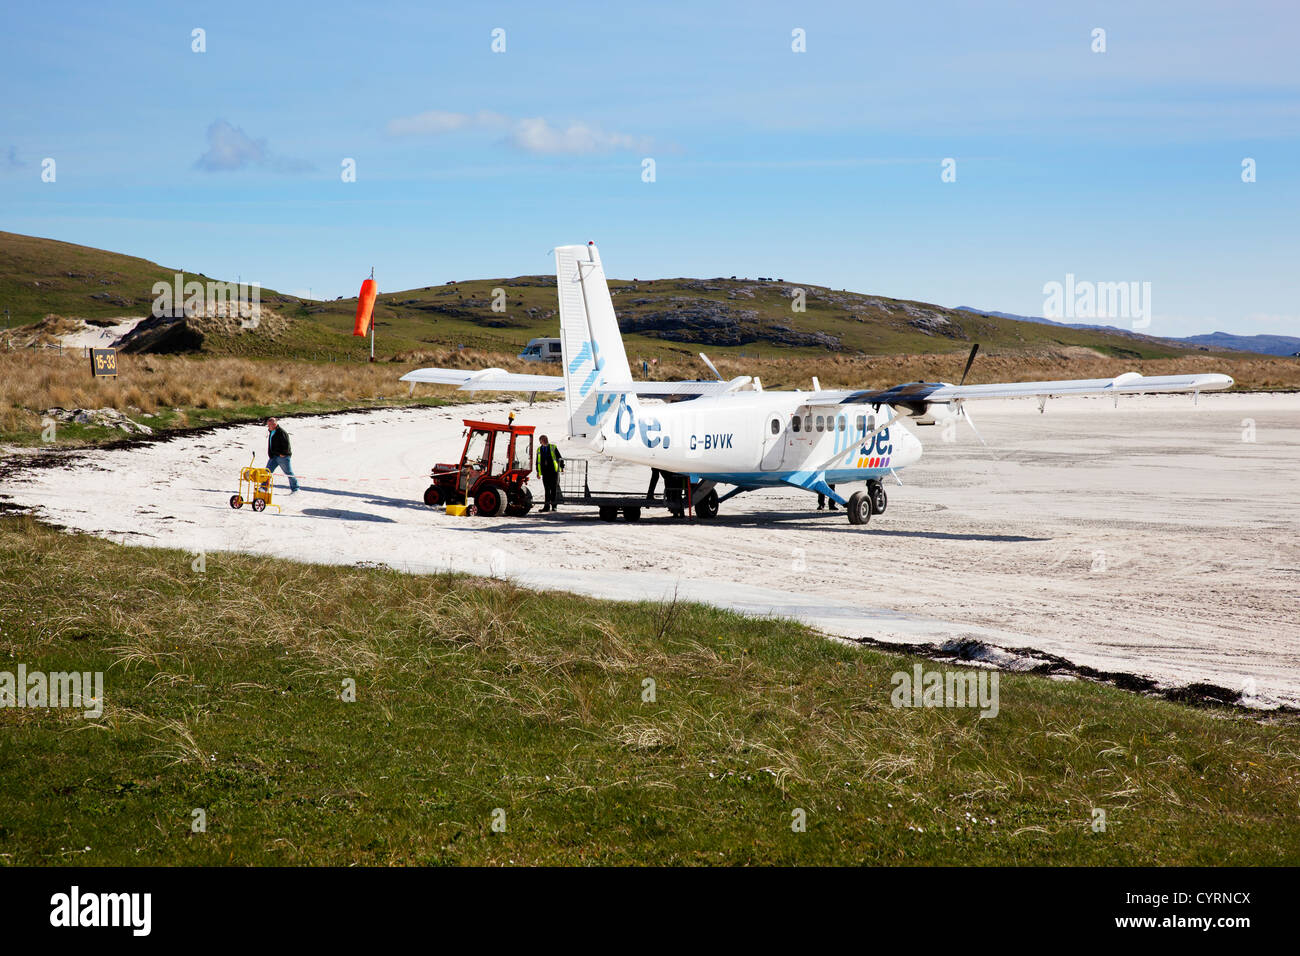 Passengers disembarking and luggage unloaded from flybe flight, Traigh Mhor, Barra, Outer Hebrides, Scotland, UK Stock Photo